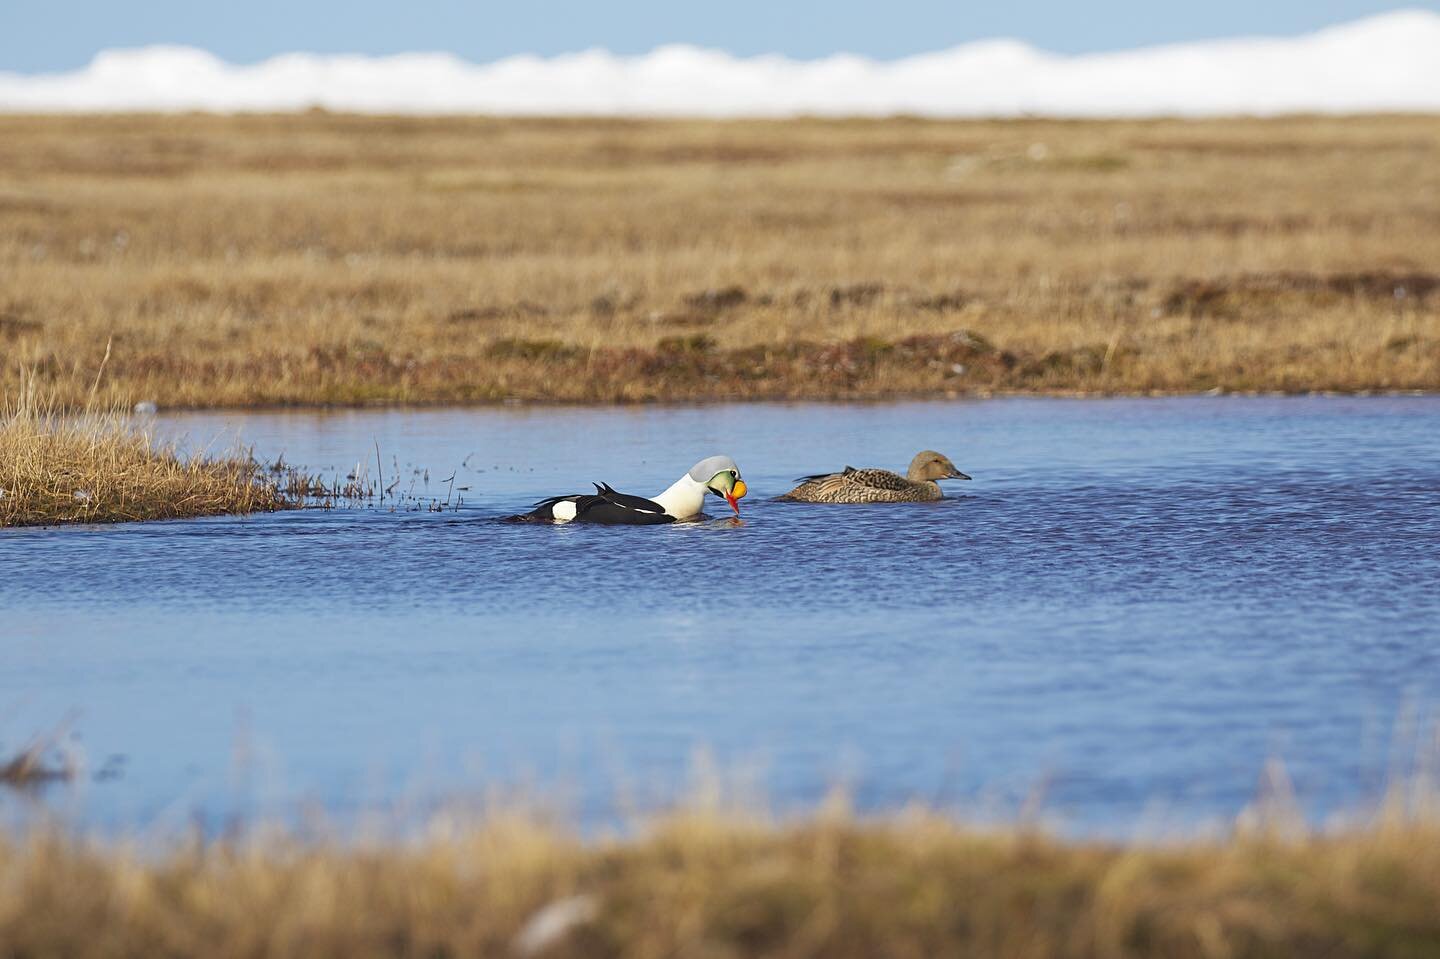 Don&rsquo;t let their ornate design or pastel plumage fool you, King Eiders ain&rsquo;t no softies. These ducks are absolute powerhouses. They nest exclusively north of the Arctic Circle where they spend only a short period of time inland on tranquil